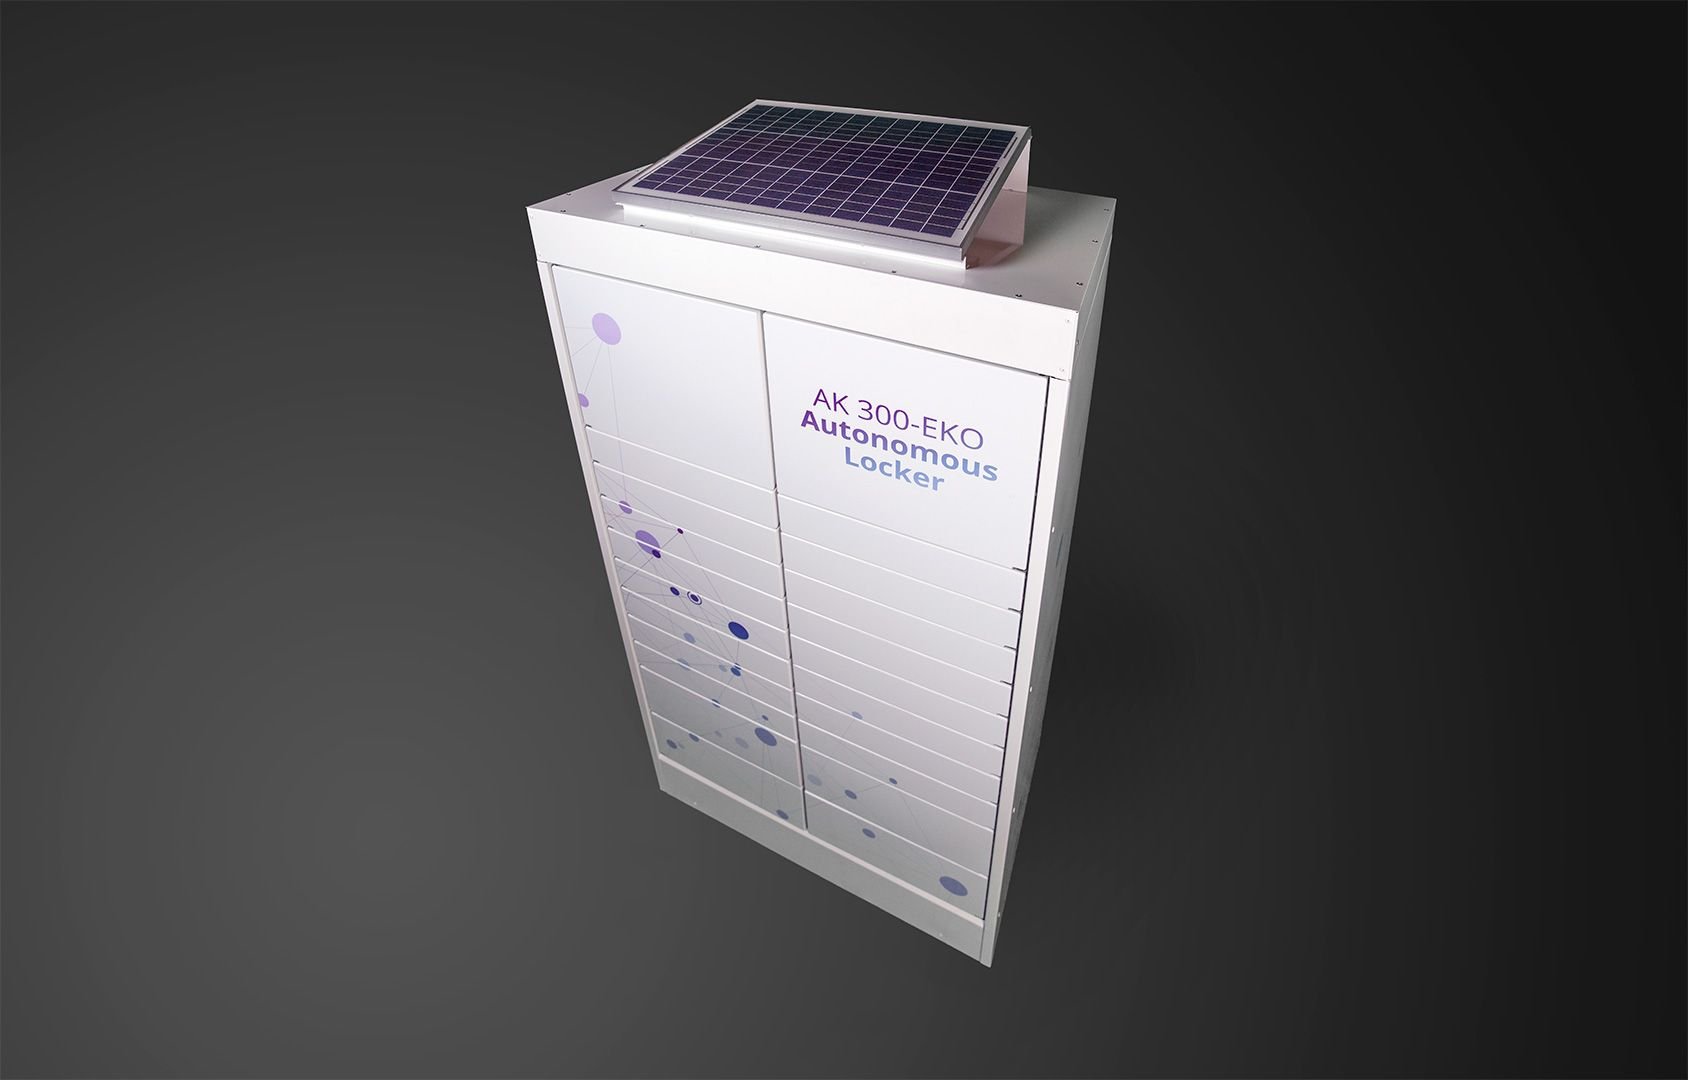 Angle view of the solar panel mounted on a solar-powered smart parcel locker 